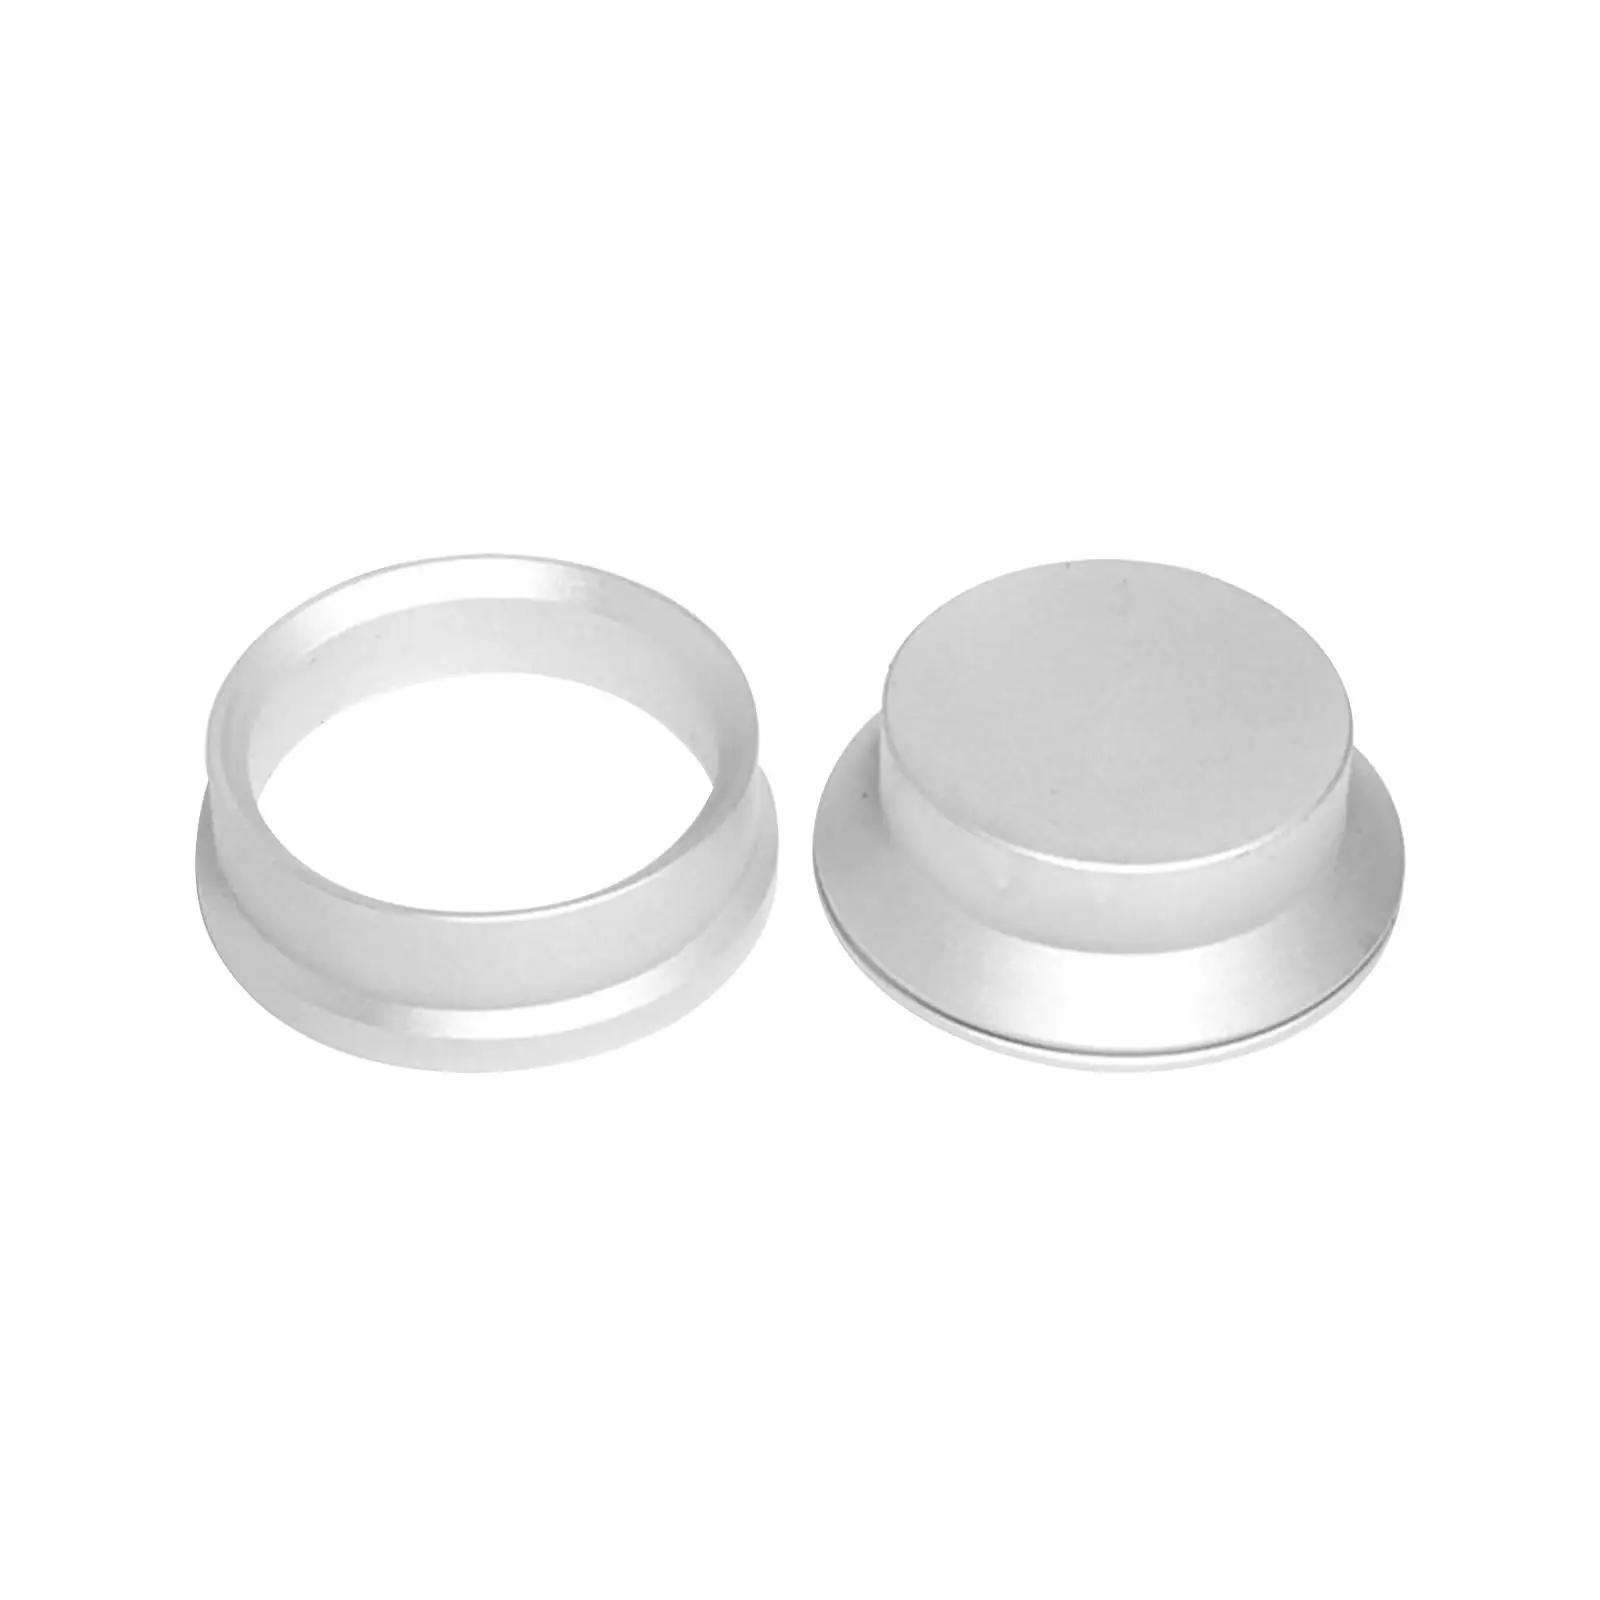 Metal Dosing Funnel Espresso Distributor Replacement,Coffee Dosing Cup for 54mm Portafilter